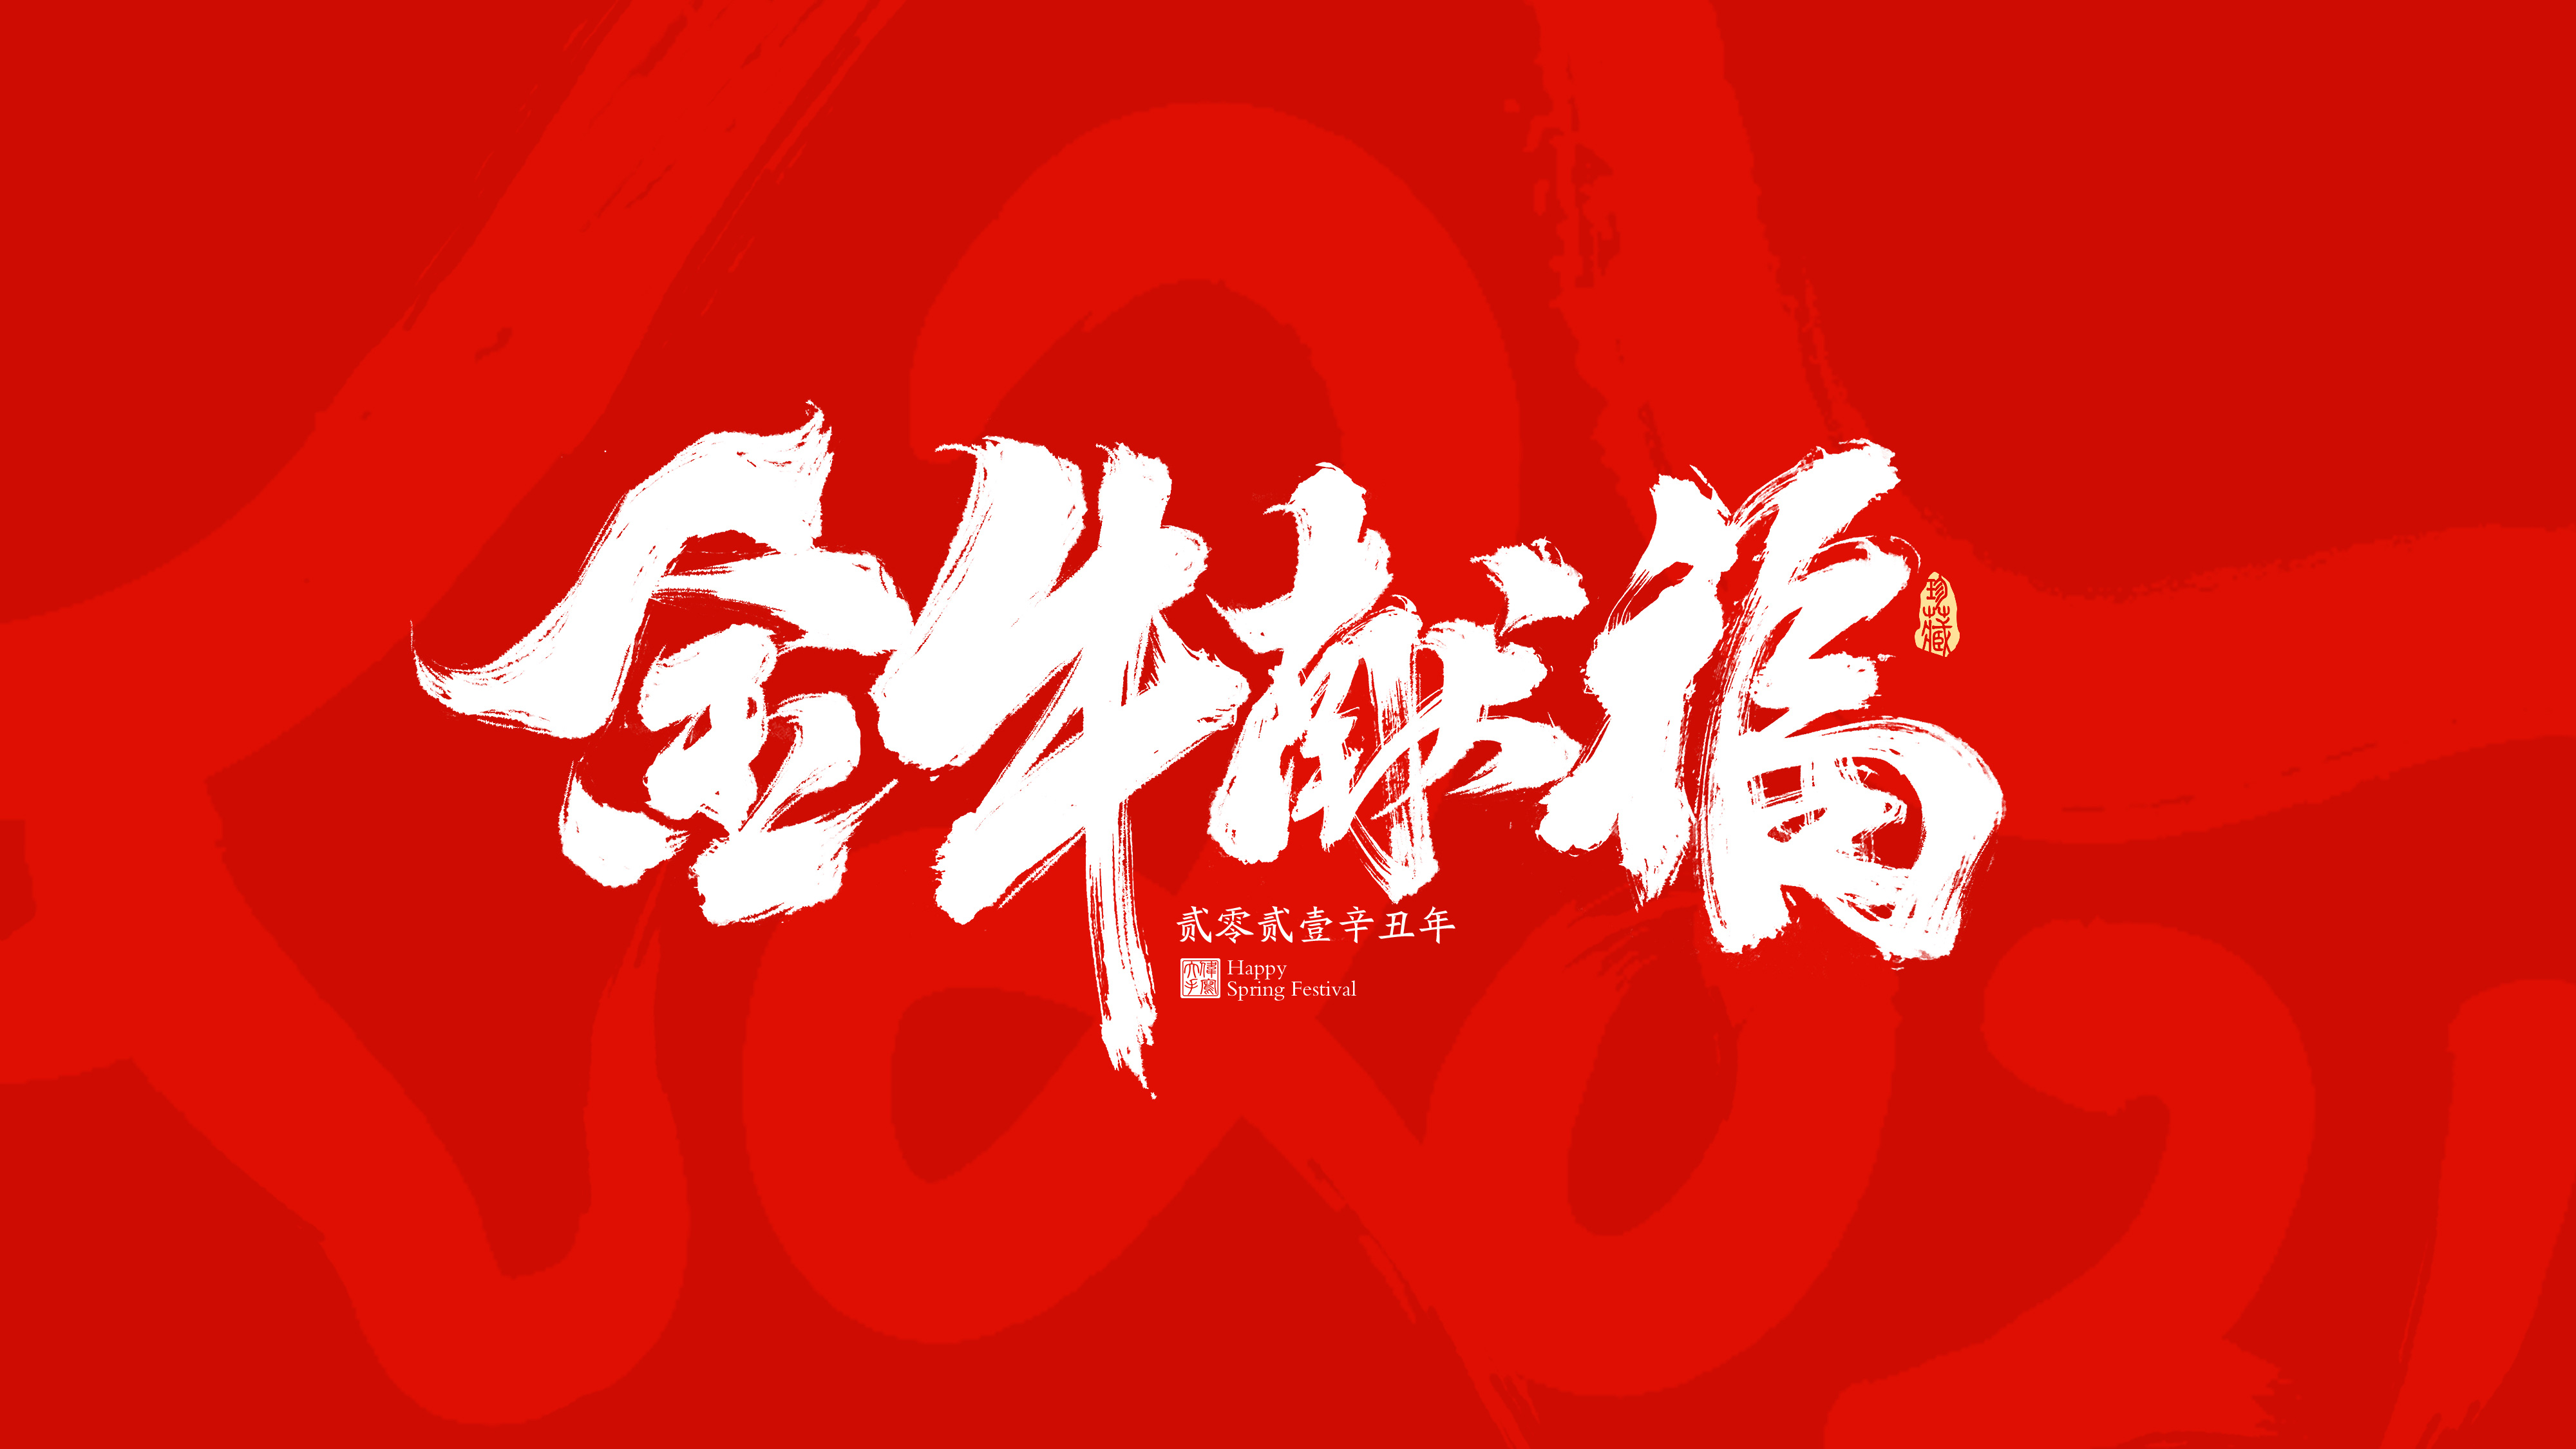 2021 Year of the Ox Spring Festival greetings